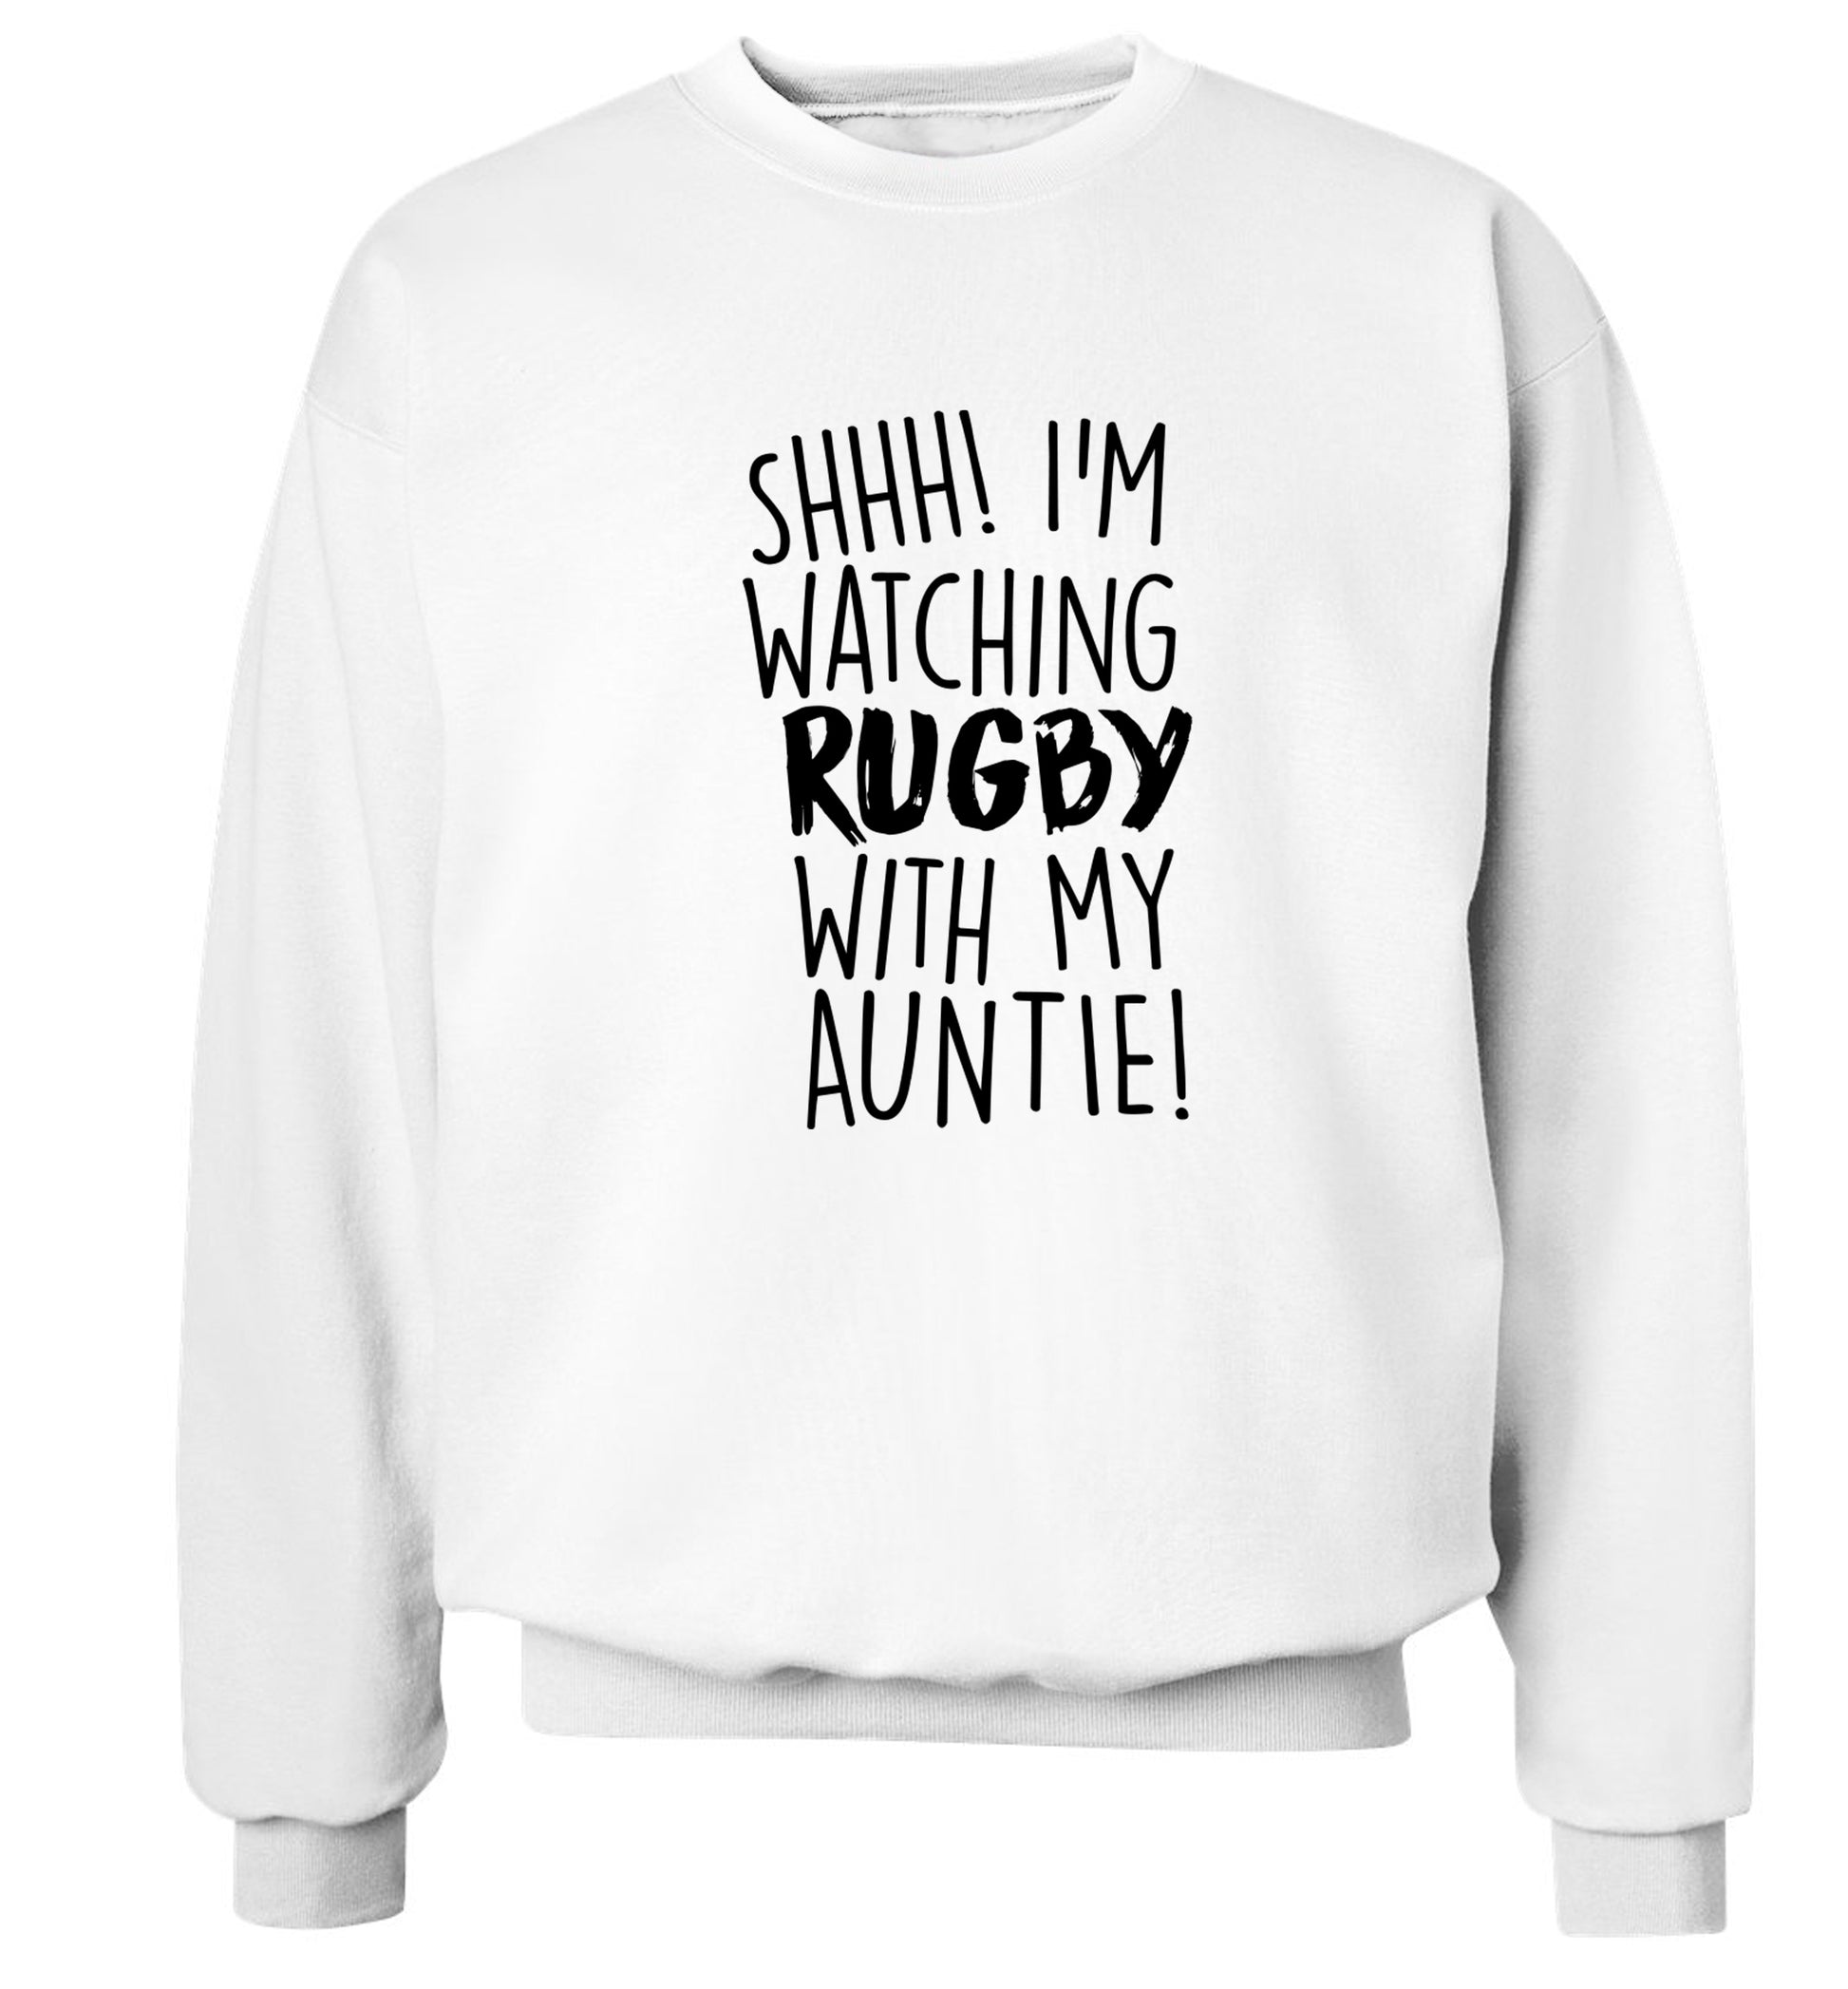 Shhh I'm watchin rugby with my auntie Adult's unisex white Sweater 2XL